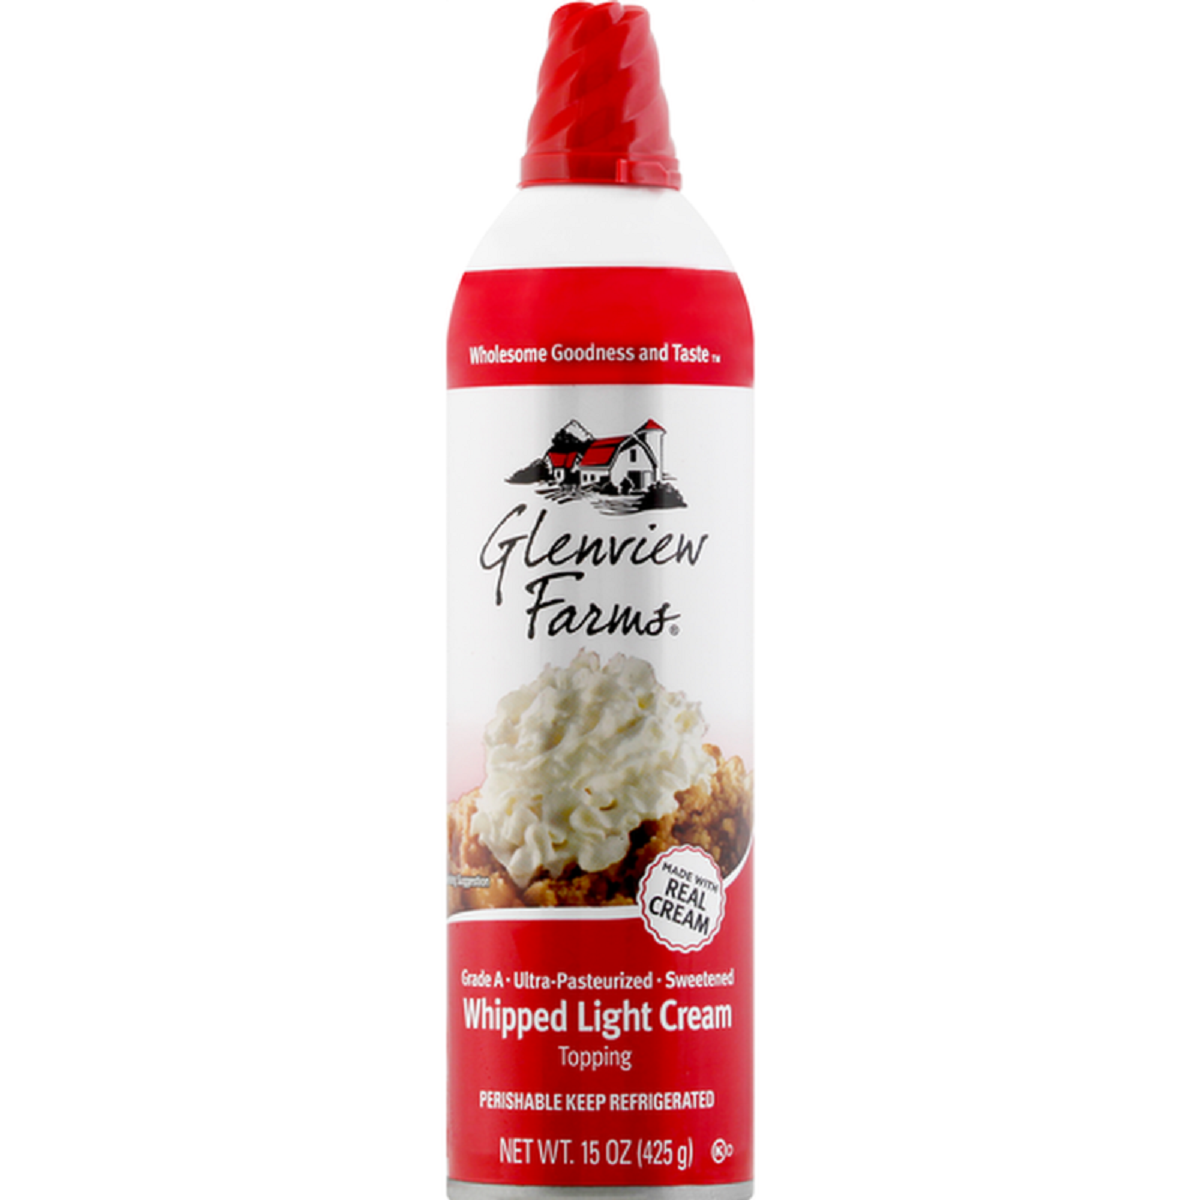 Glenview Farms Light Whipped Topping